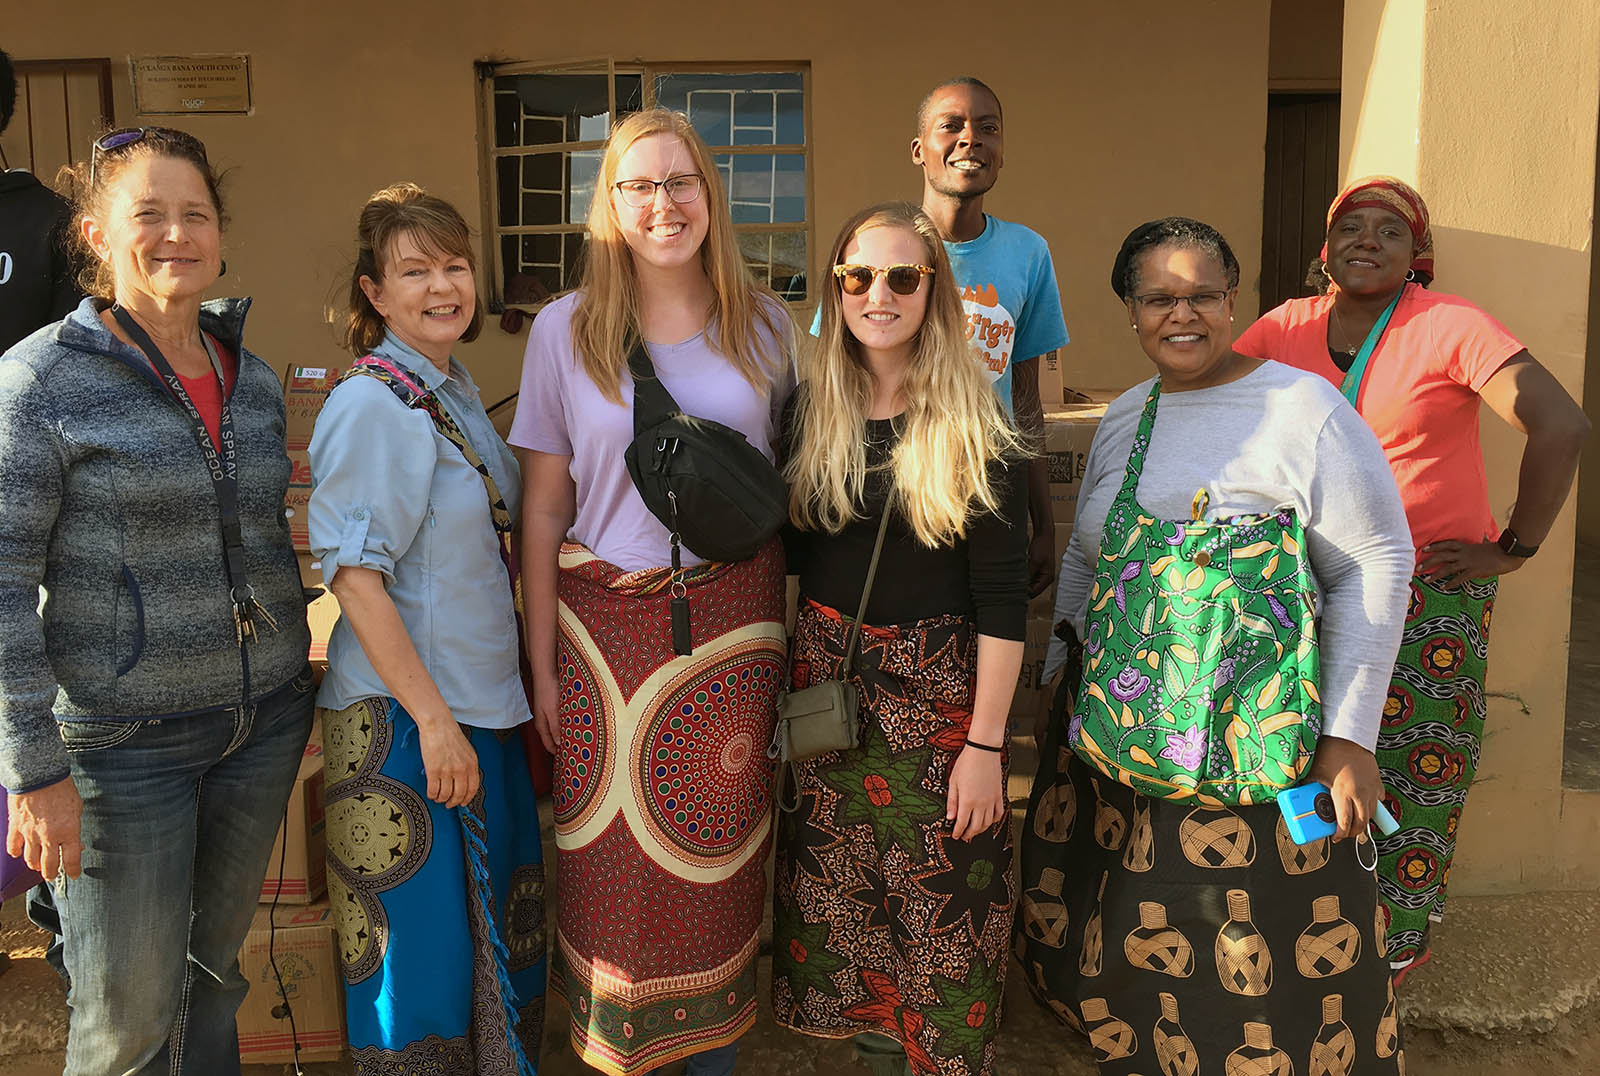 A group of UNK students and faculty traveled to Zambia this summer to work with Dr. Marjie Heier, left, at the Chifundo Rural Health Center, where Heier serves as medical director. Heier will speak Wednesday during the Global Perspective on Telecare and Rural Health forum hosted by UNK. (Courtesy photo)